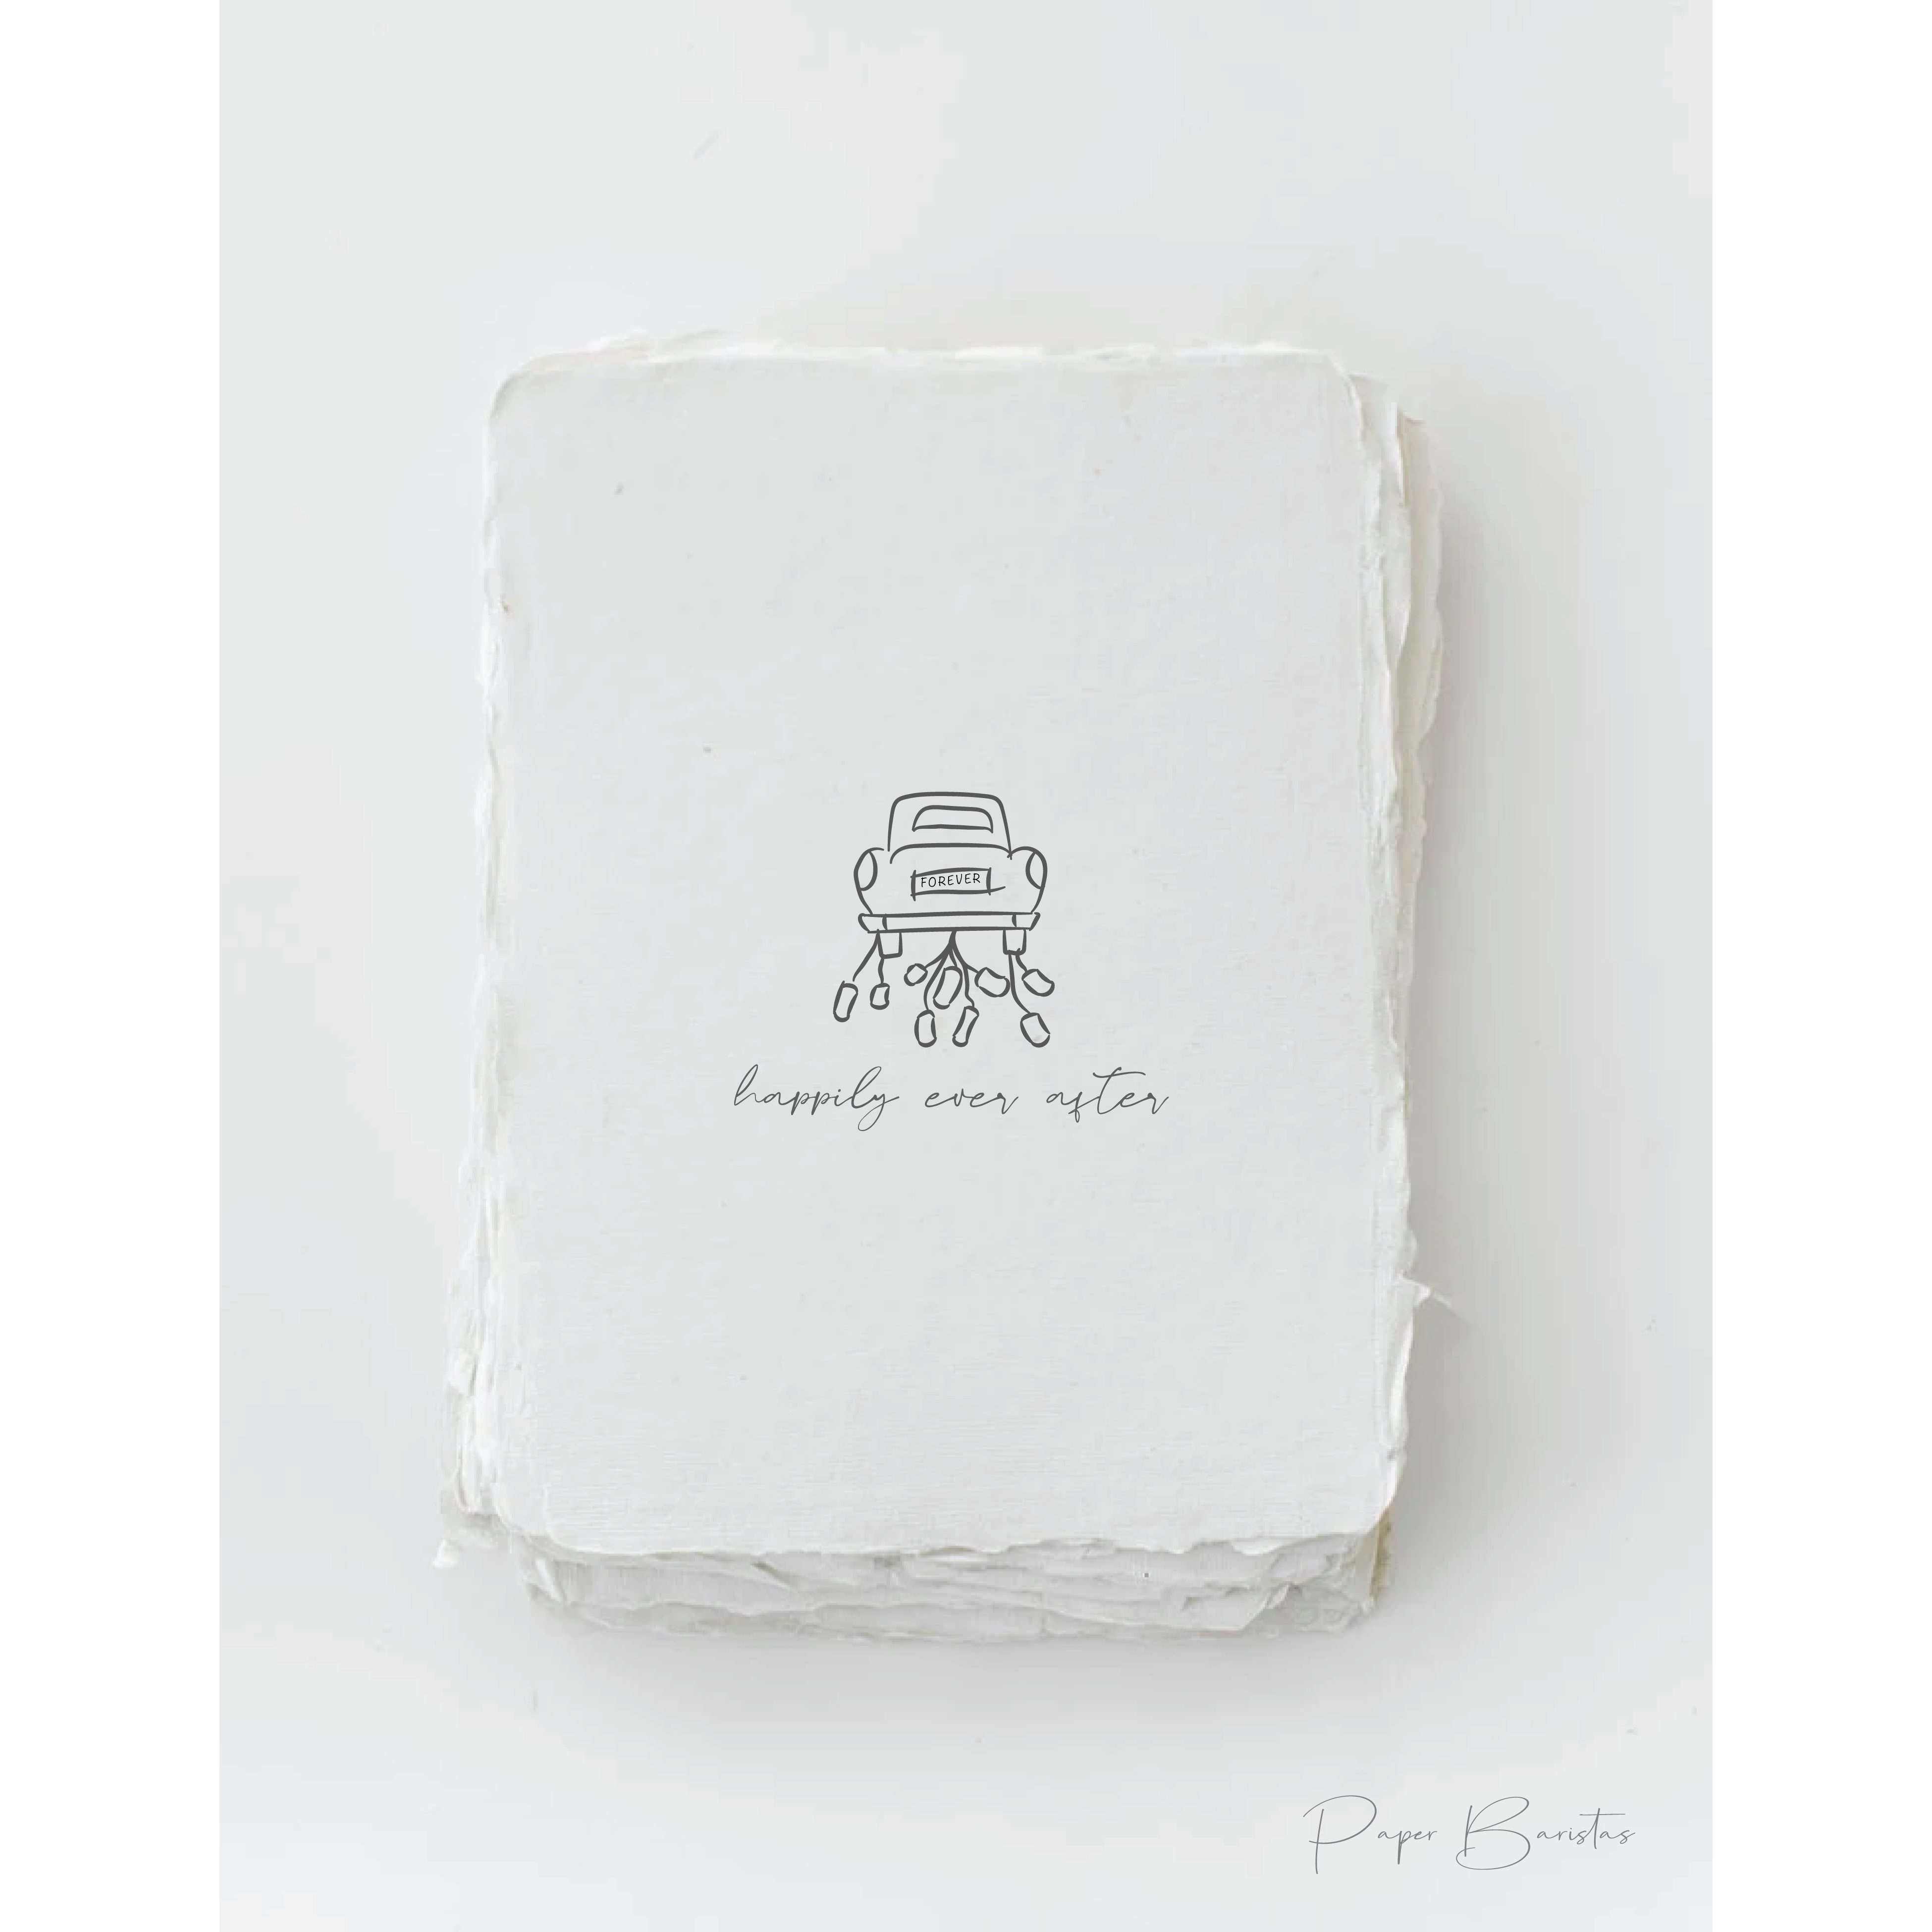 "Happily Ever After" Wedding Greeting Card